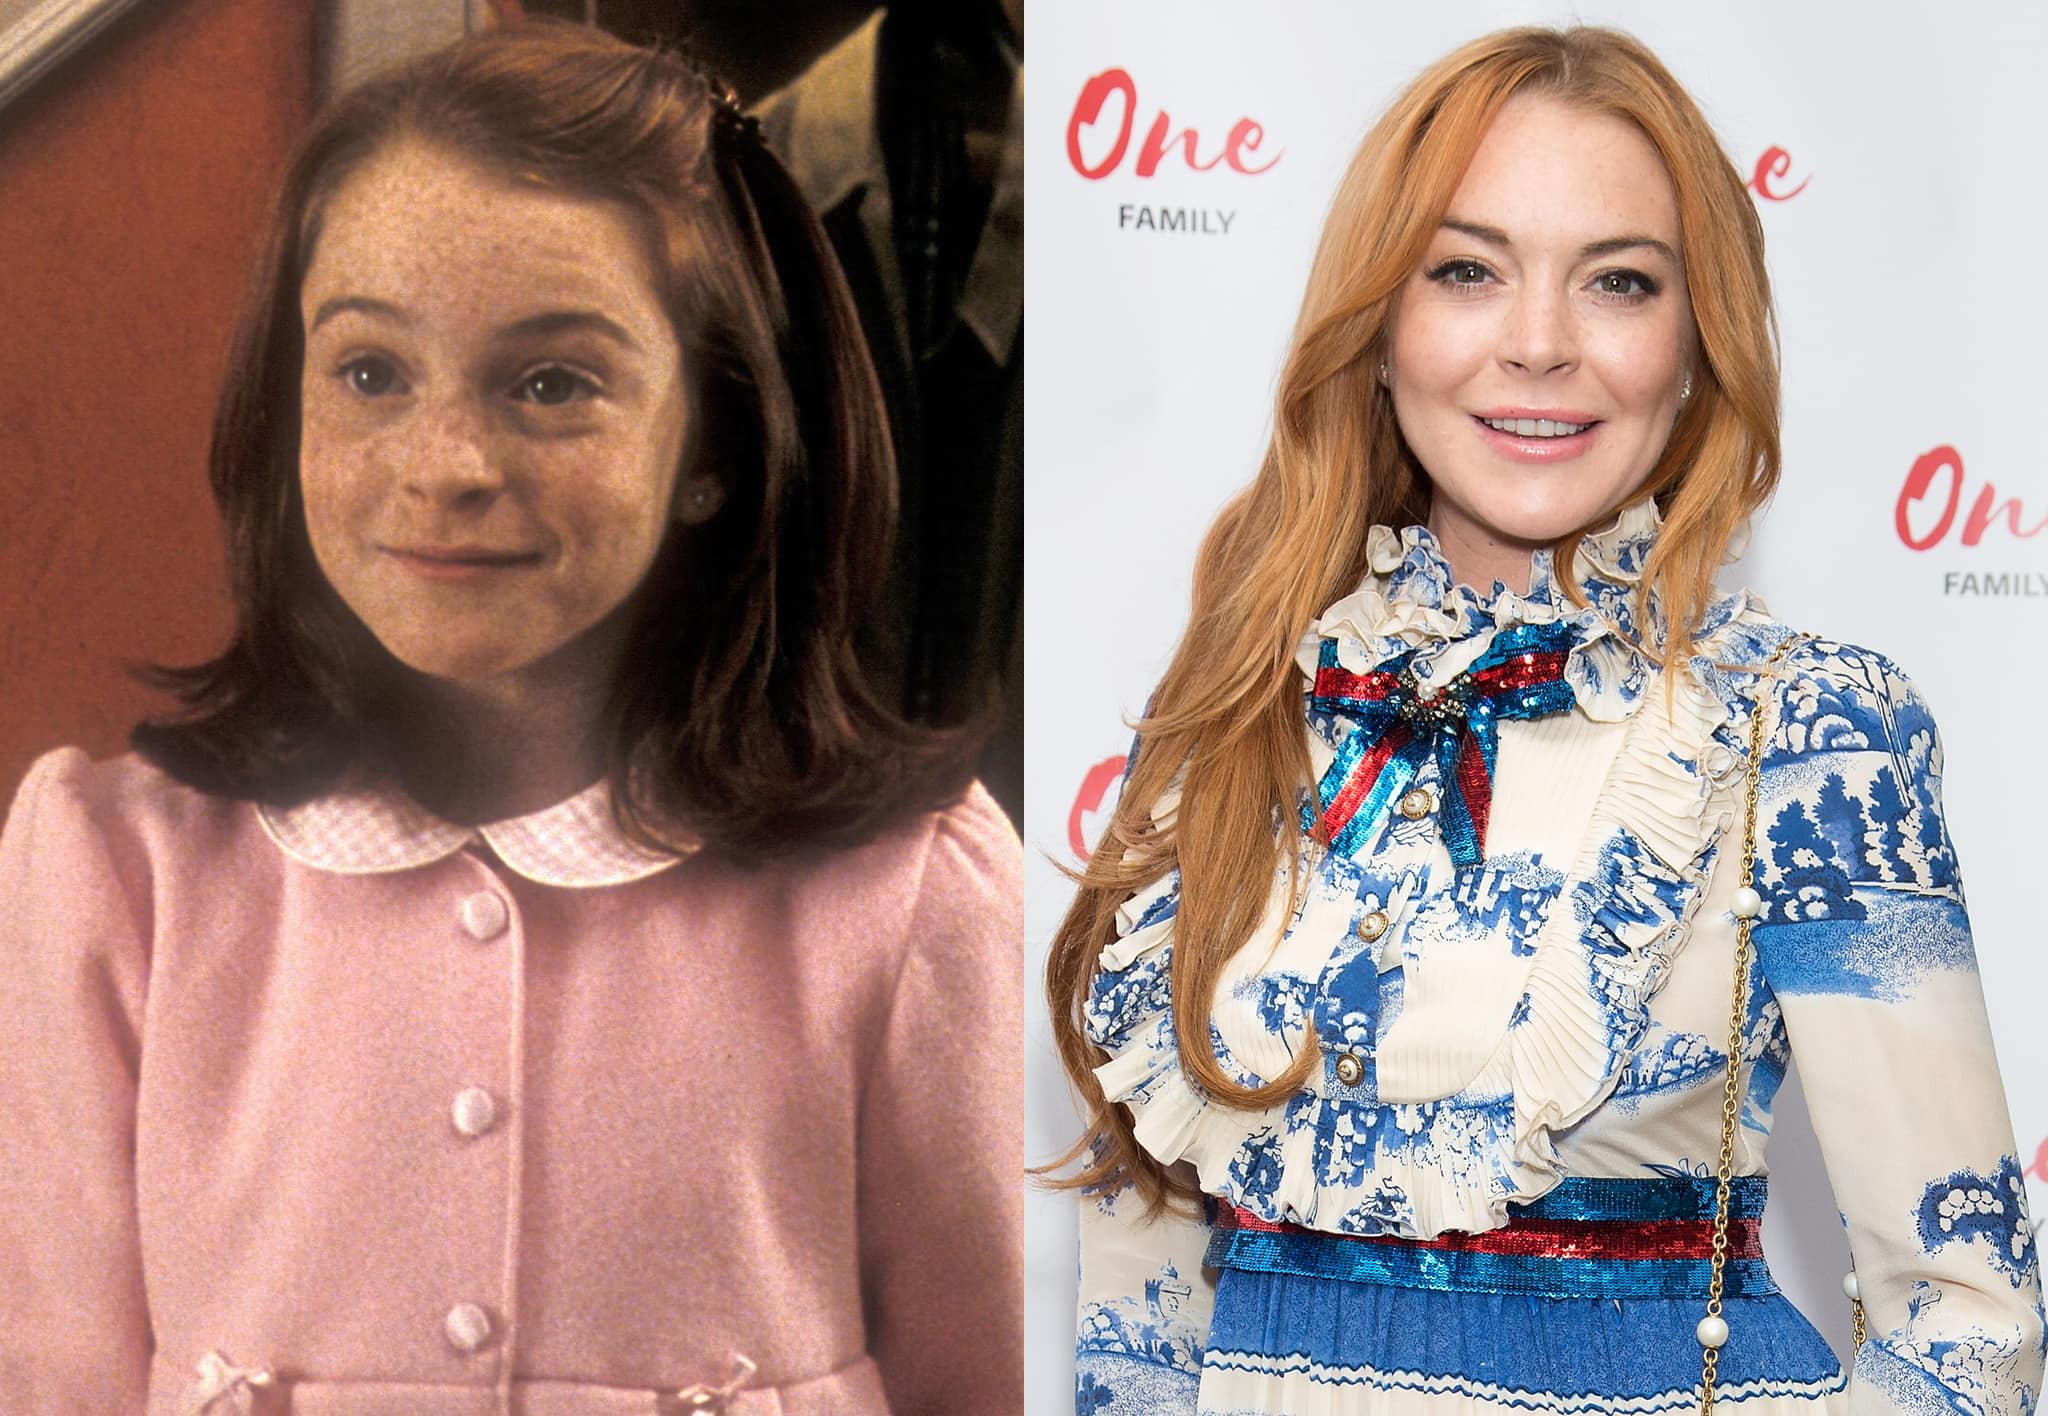 Lindsay Lohan's career took off following her starring role in The Parent Trap